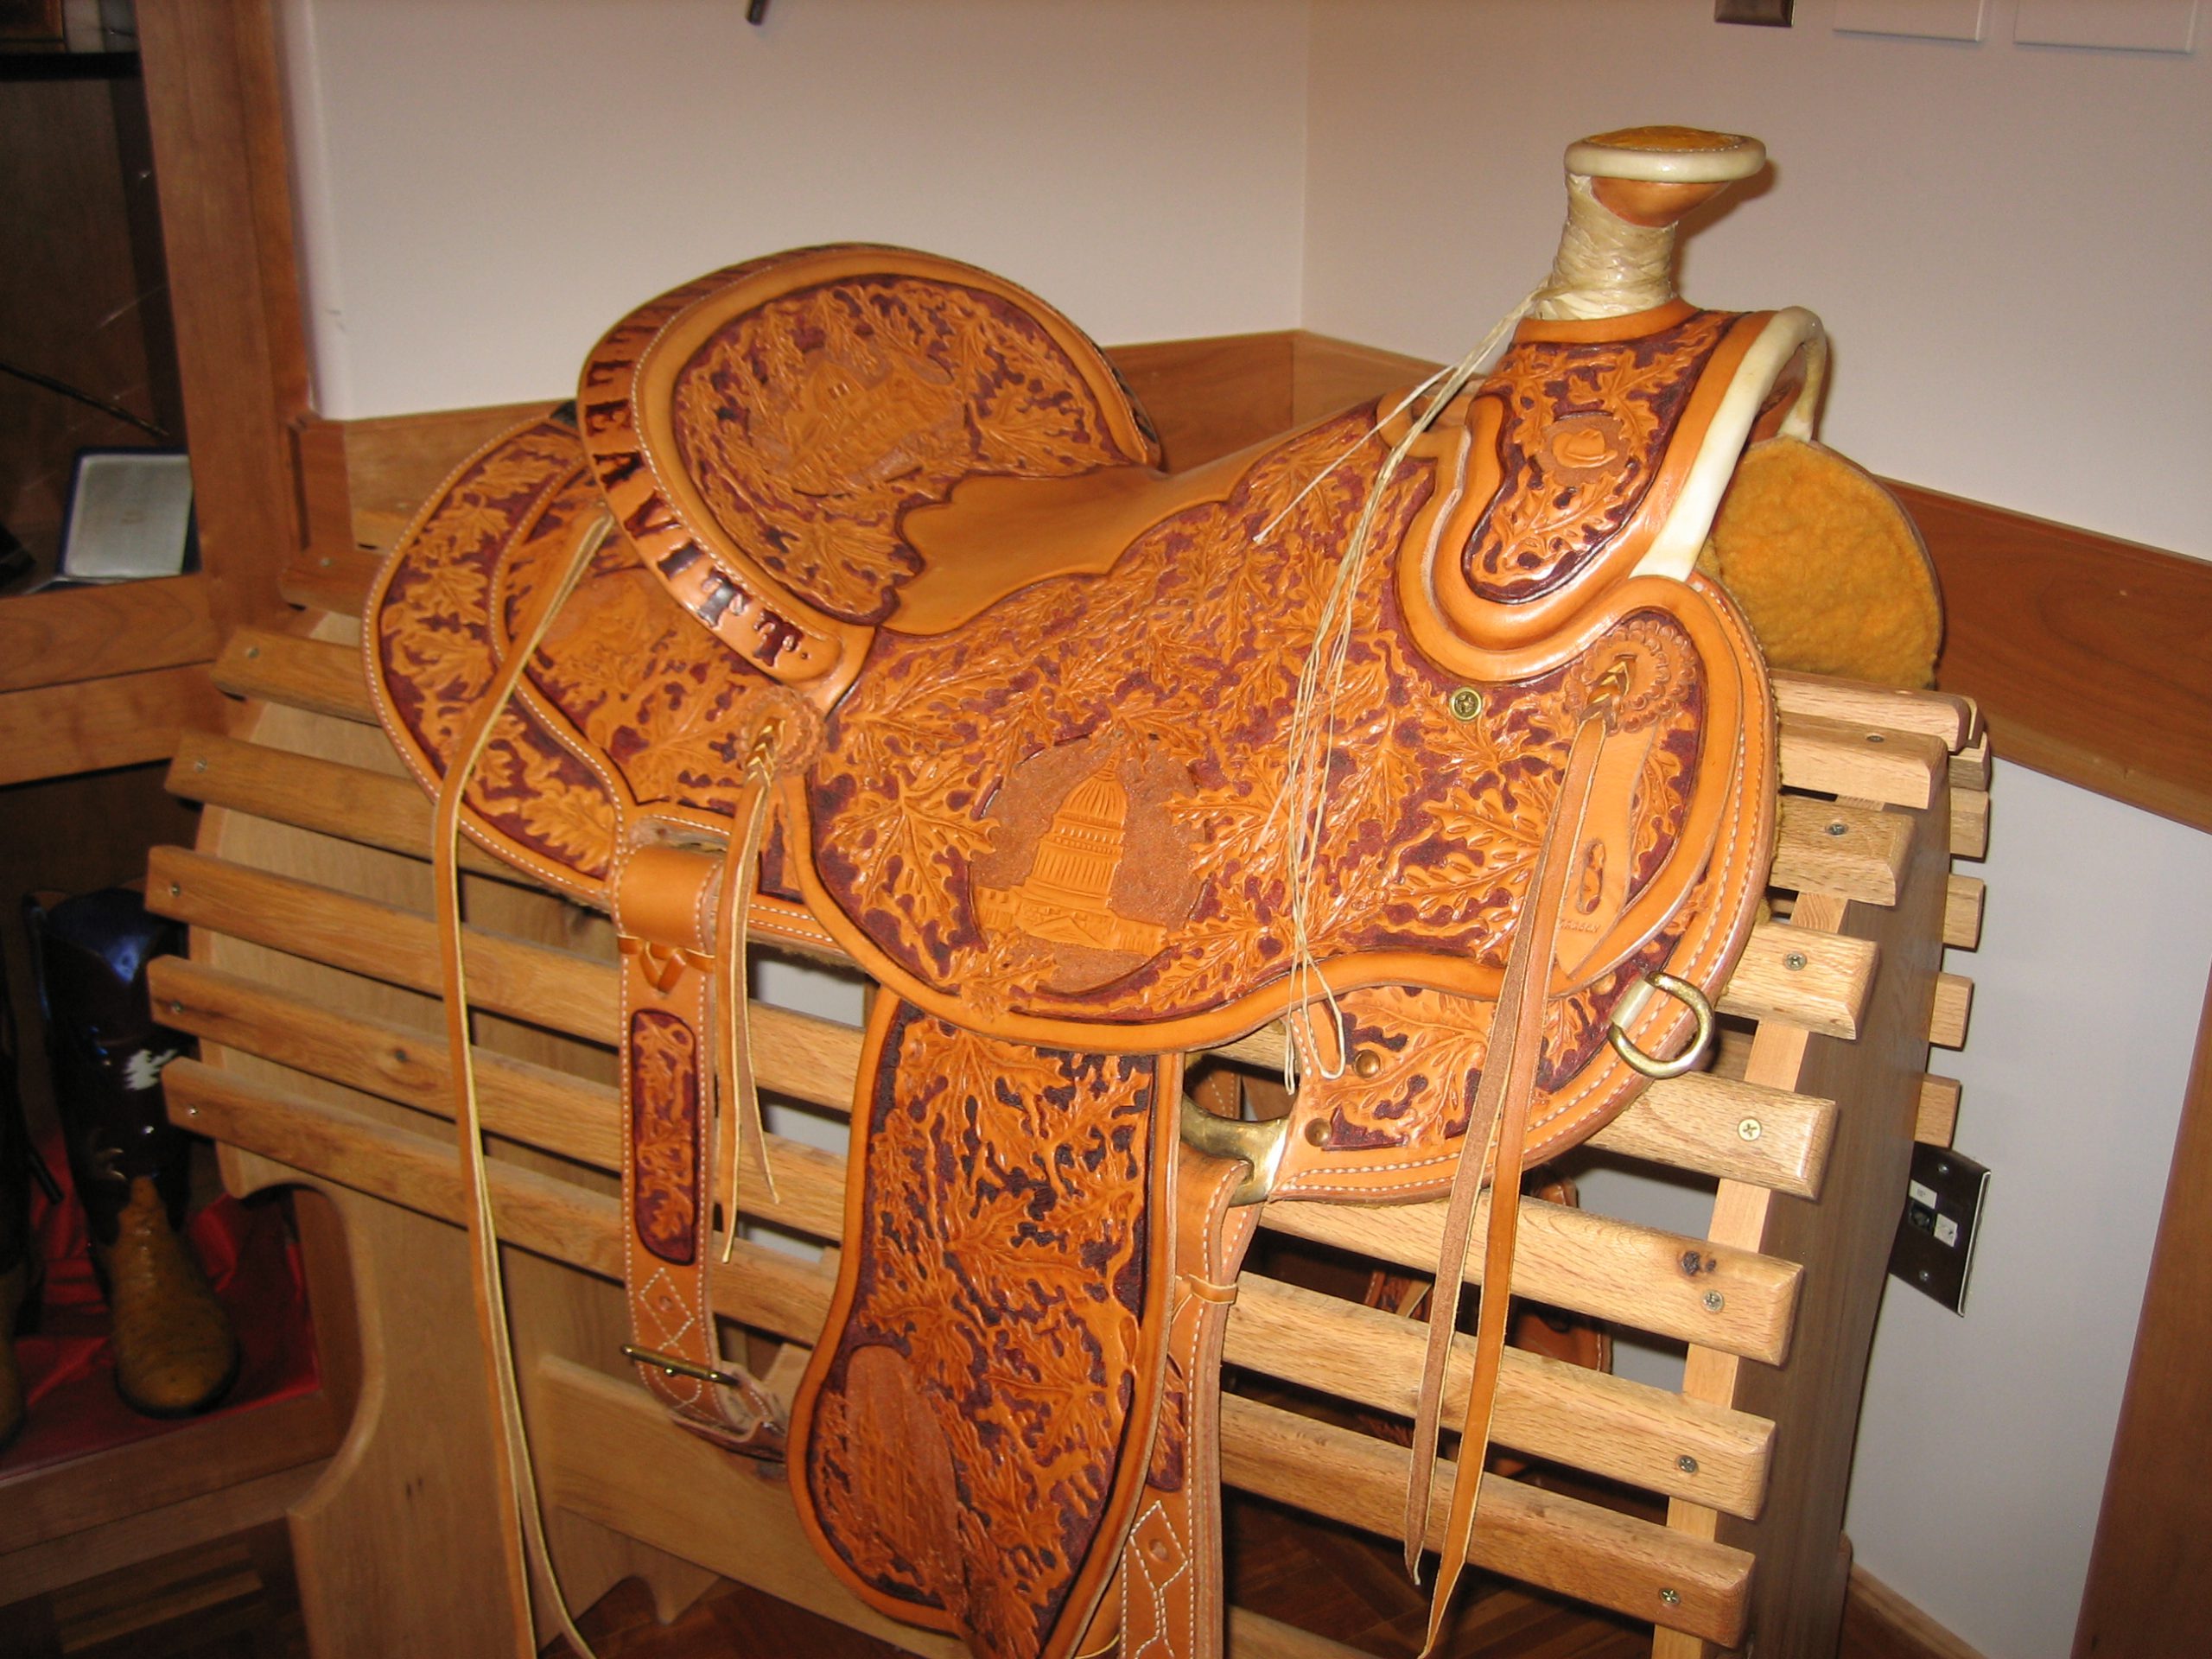 Clyde Price Saddle given to Governor Leavitt